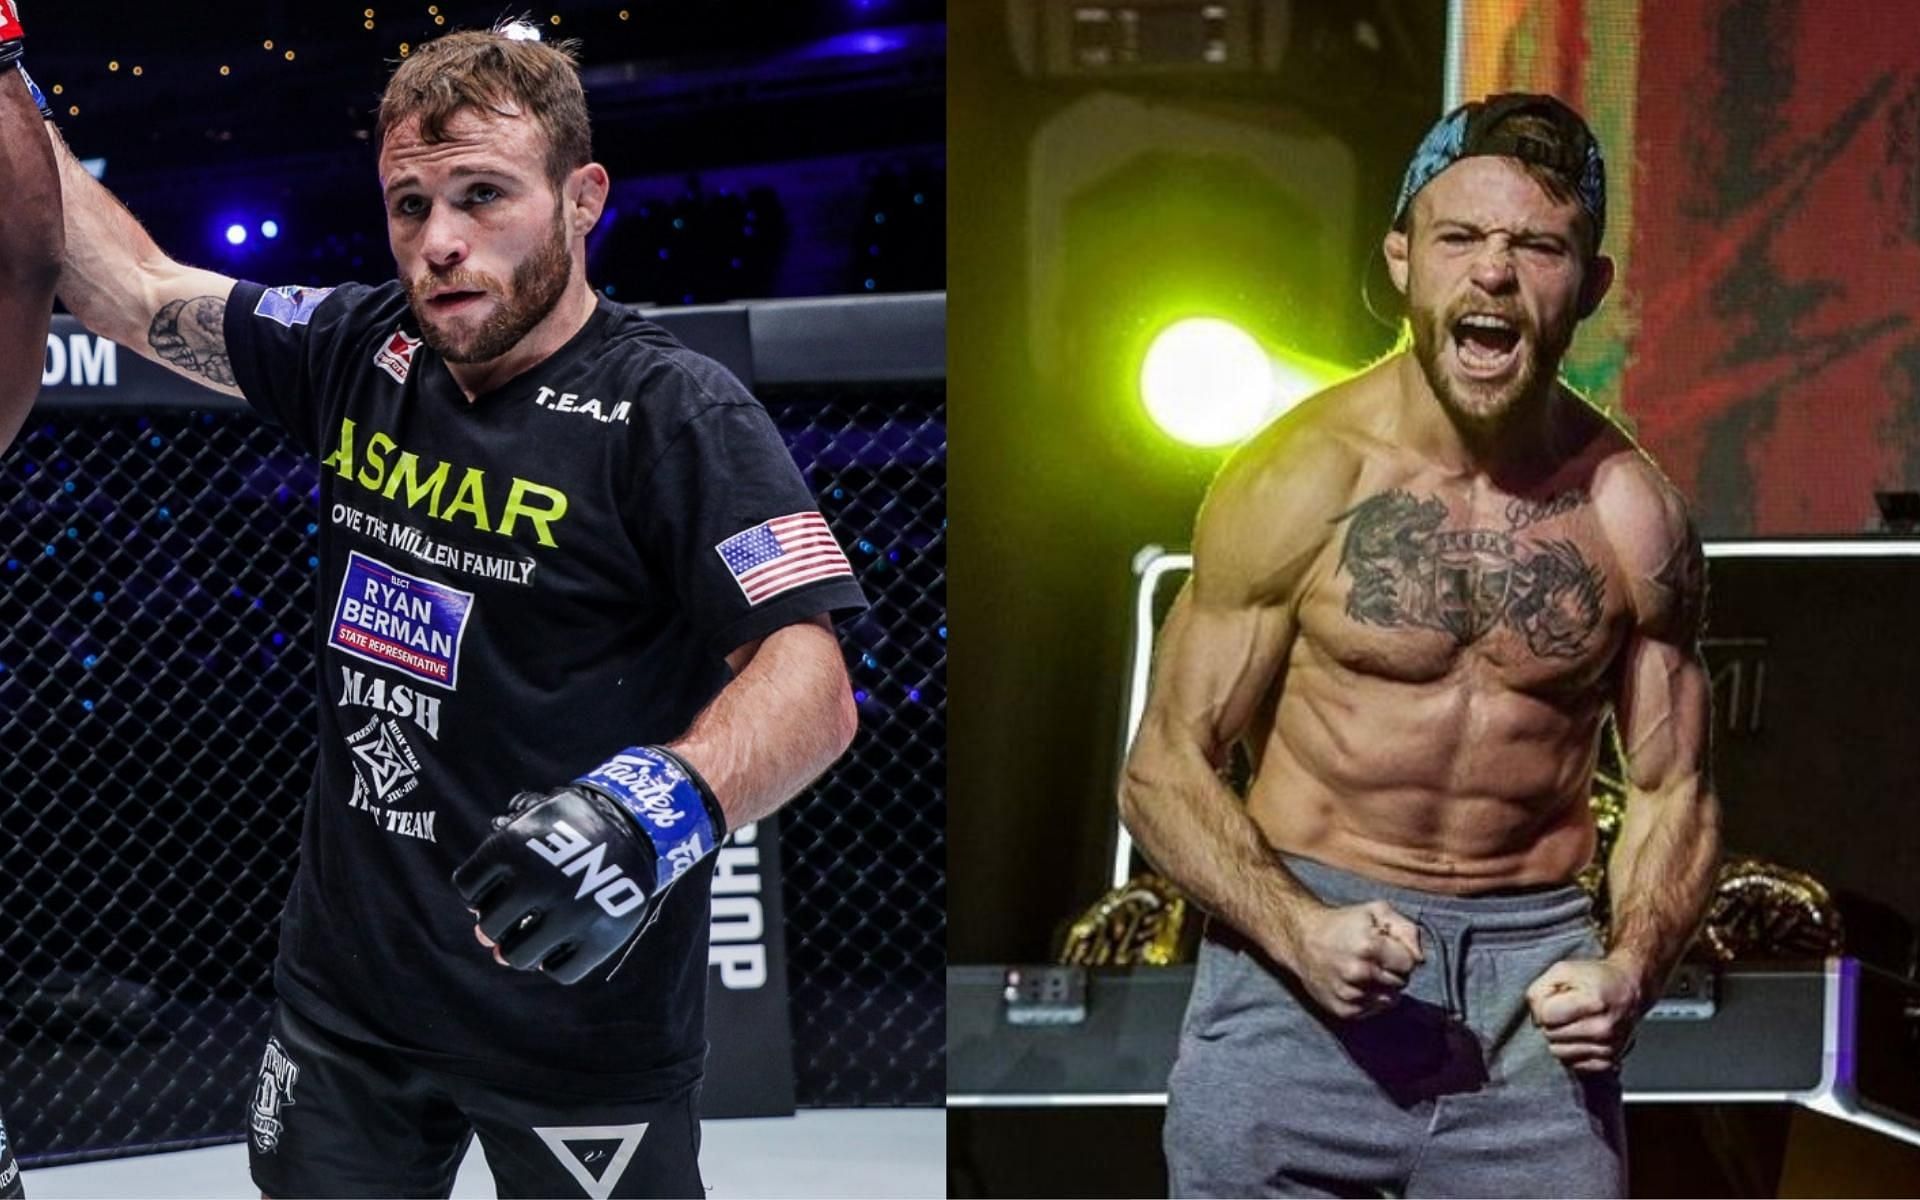 ONE strawweight title contender Jarred Brooks celebrated his 28th birthday on May 2nd. (Images courtesy of ONE Championship)